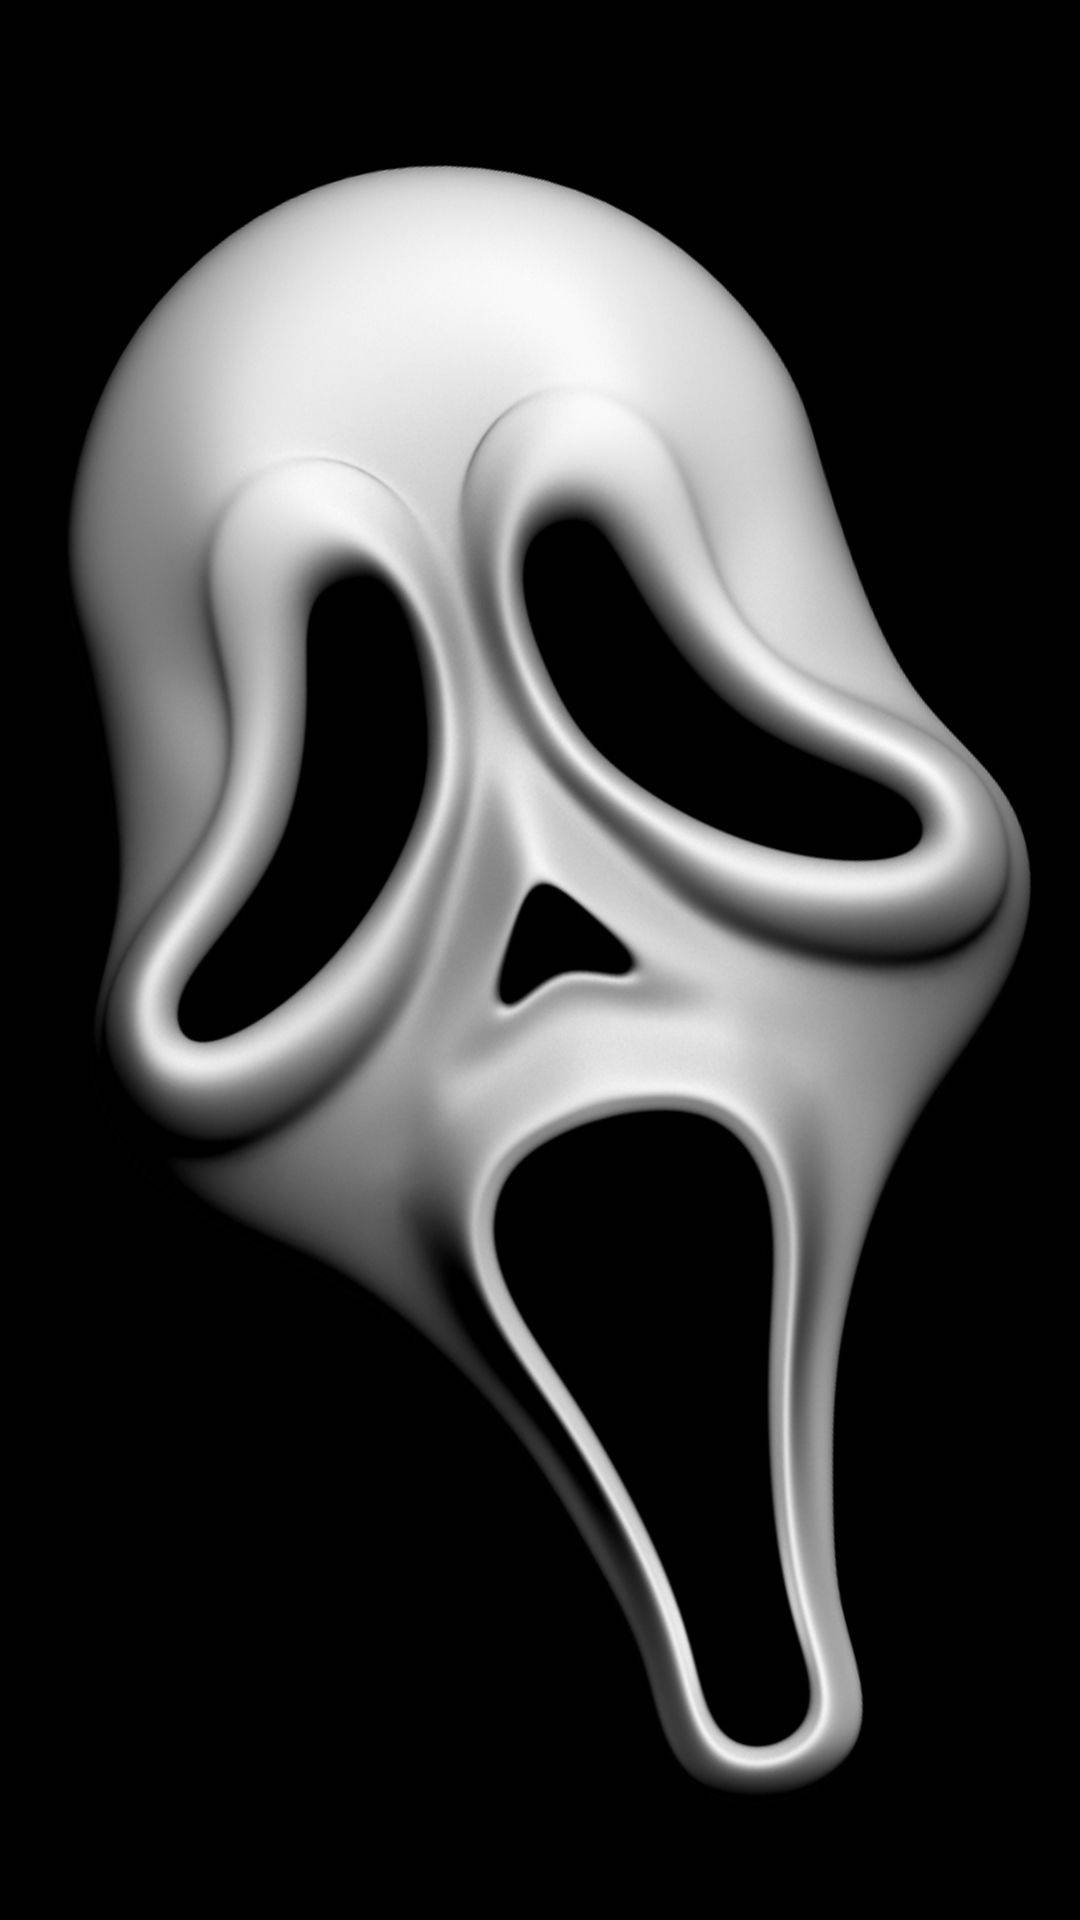 Intense Emotion Manifested - The Ghostface Mask Of The Scream Movie Background